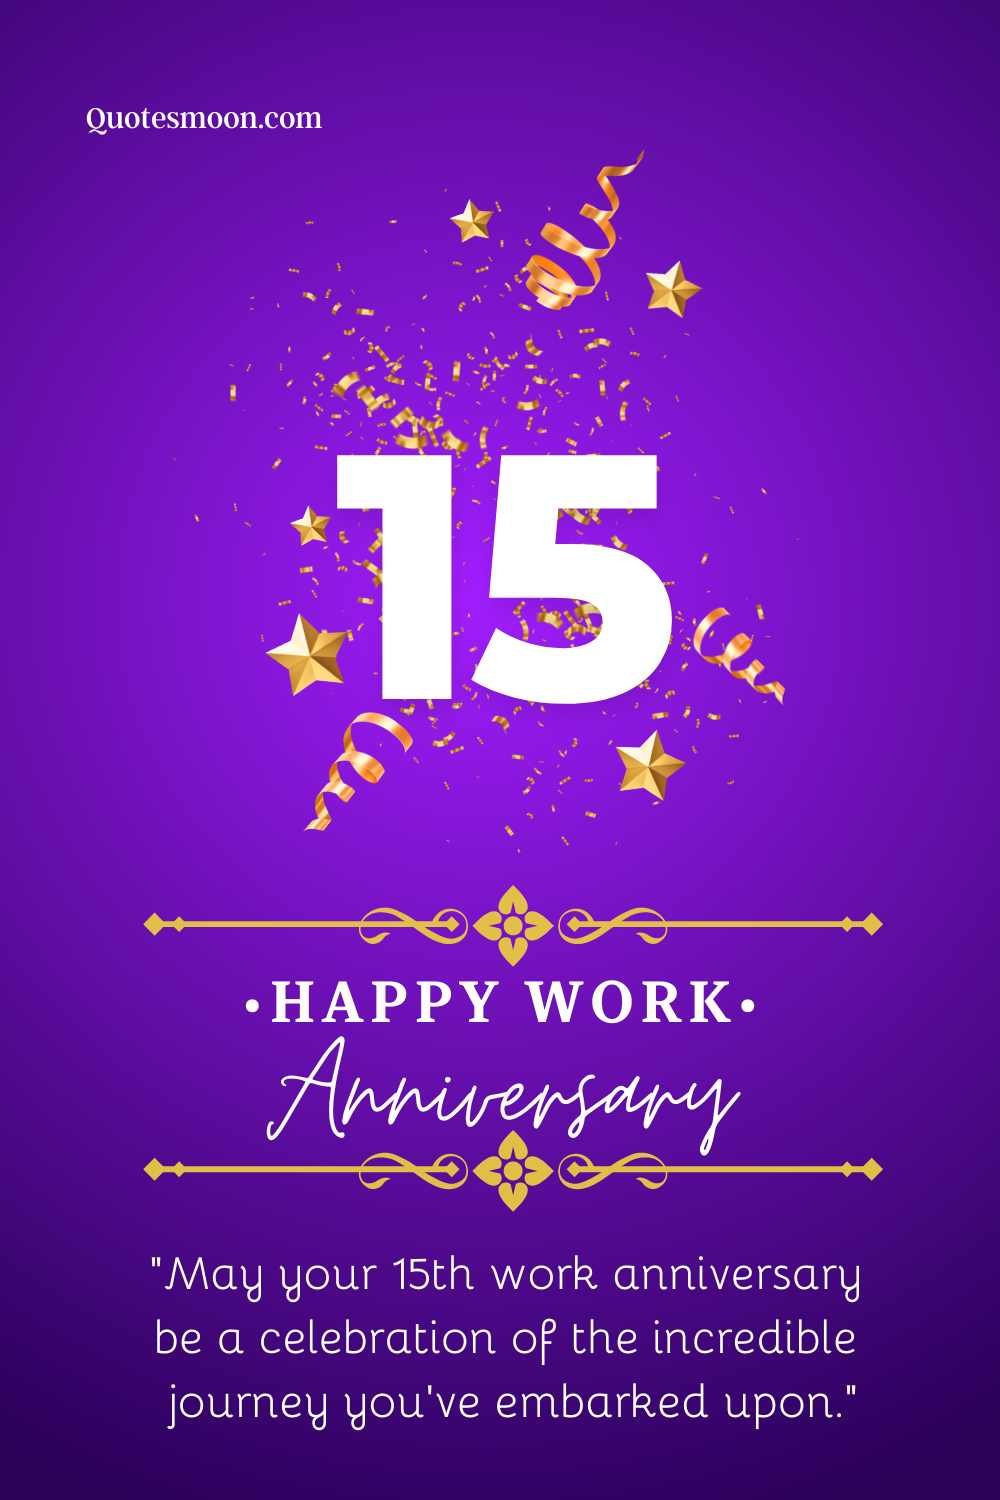 happy work anniversary message images